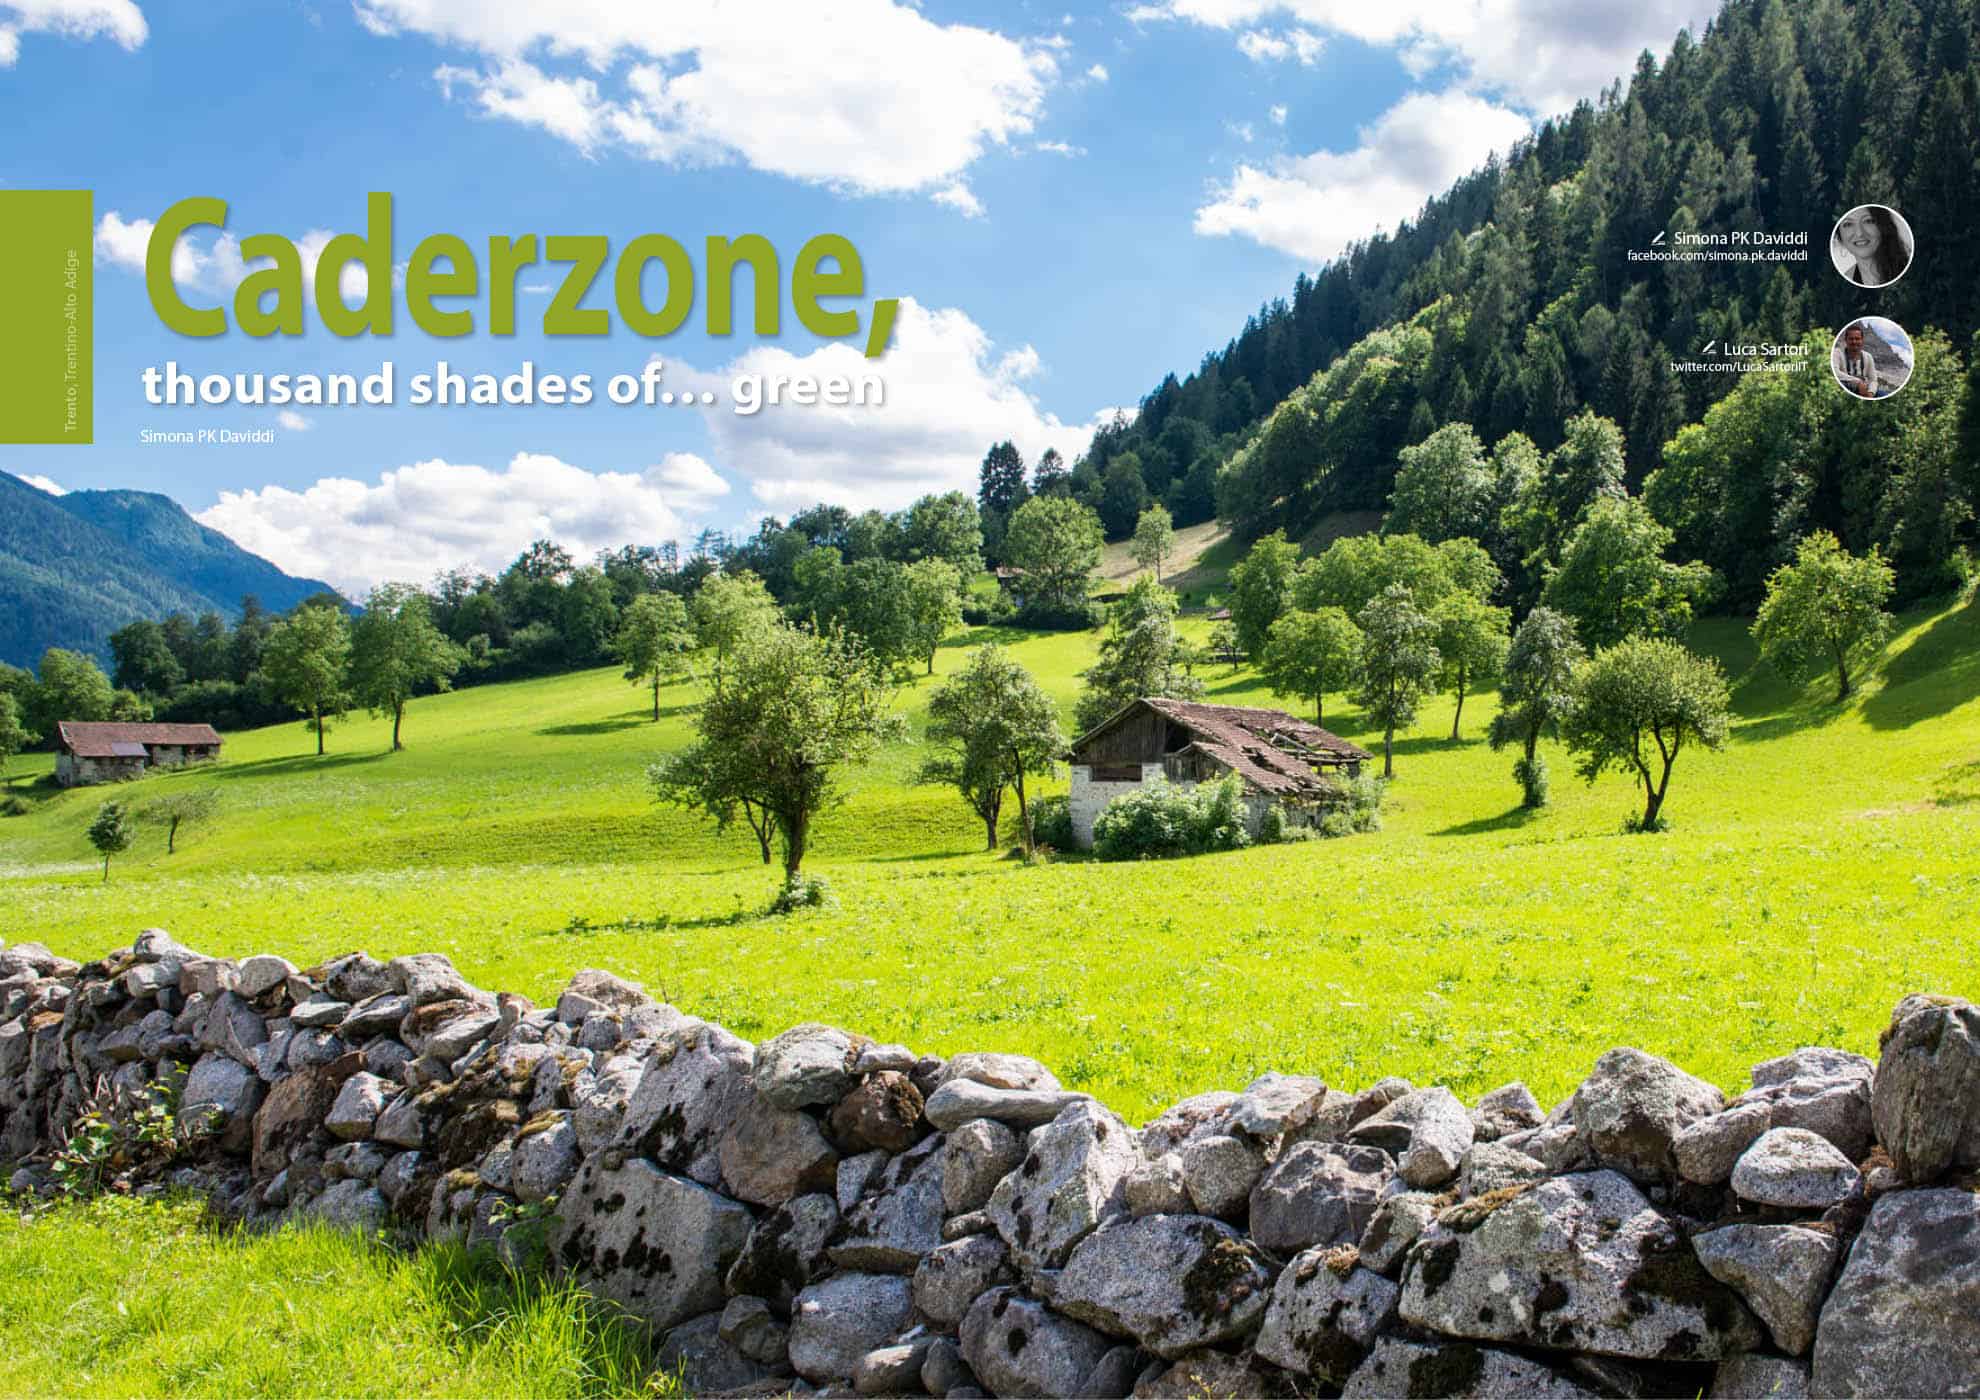 e-borghi travel 2: Well-being and villages - Caderzone, Thousand shades of… green